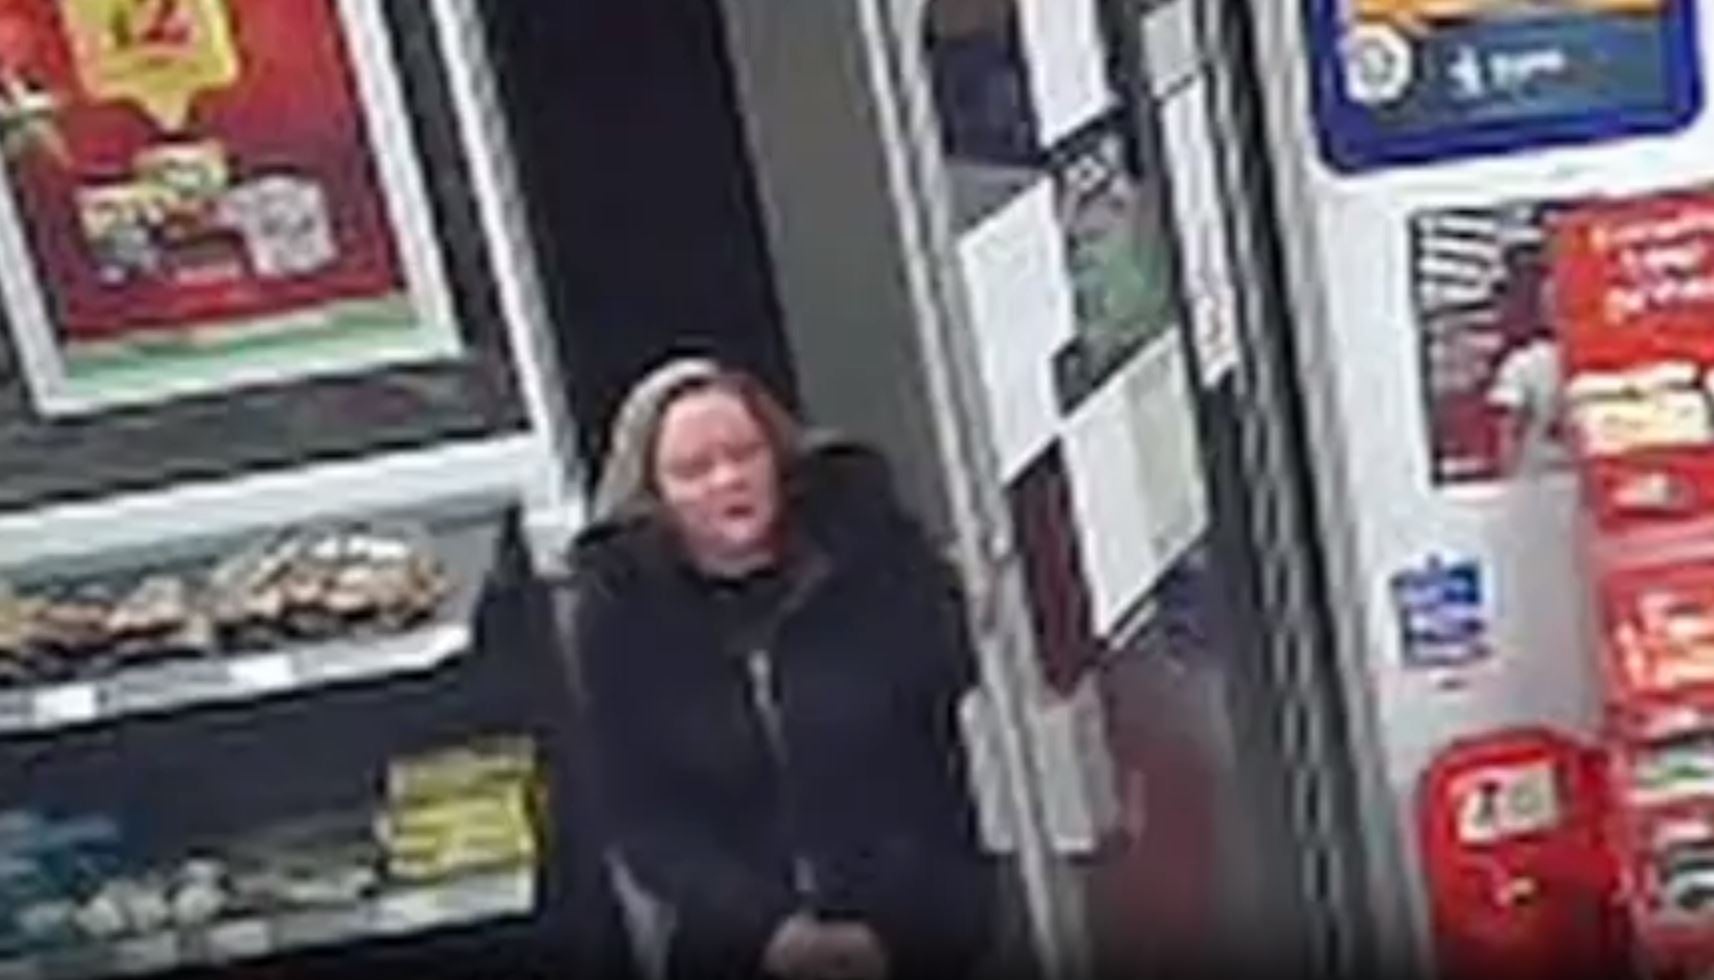 Claire Inglis was caught on CCTV shopping shortly before she was killed